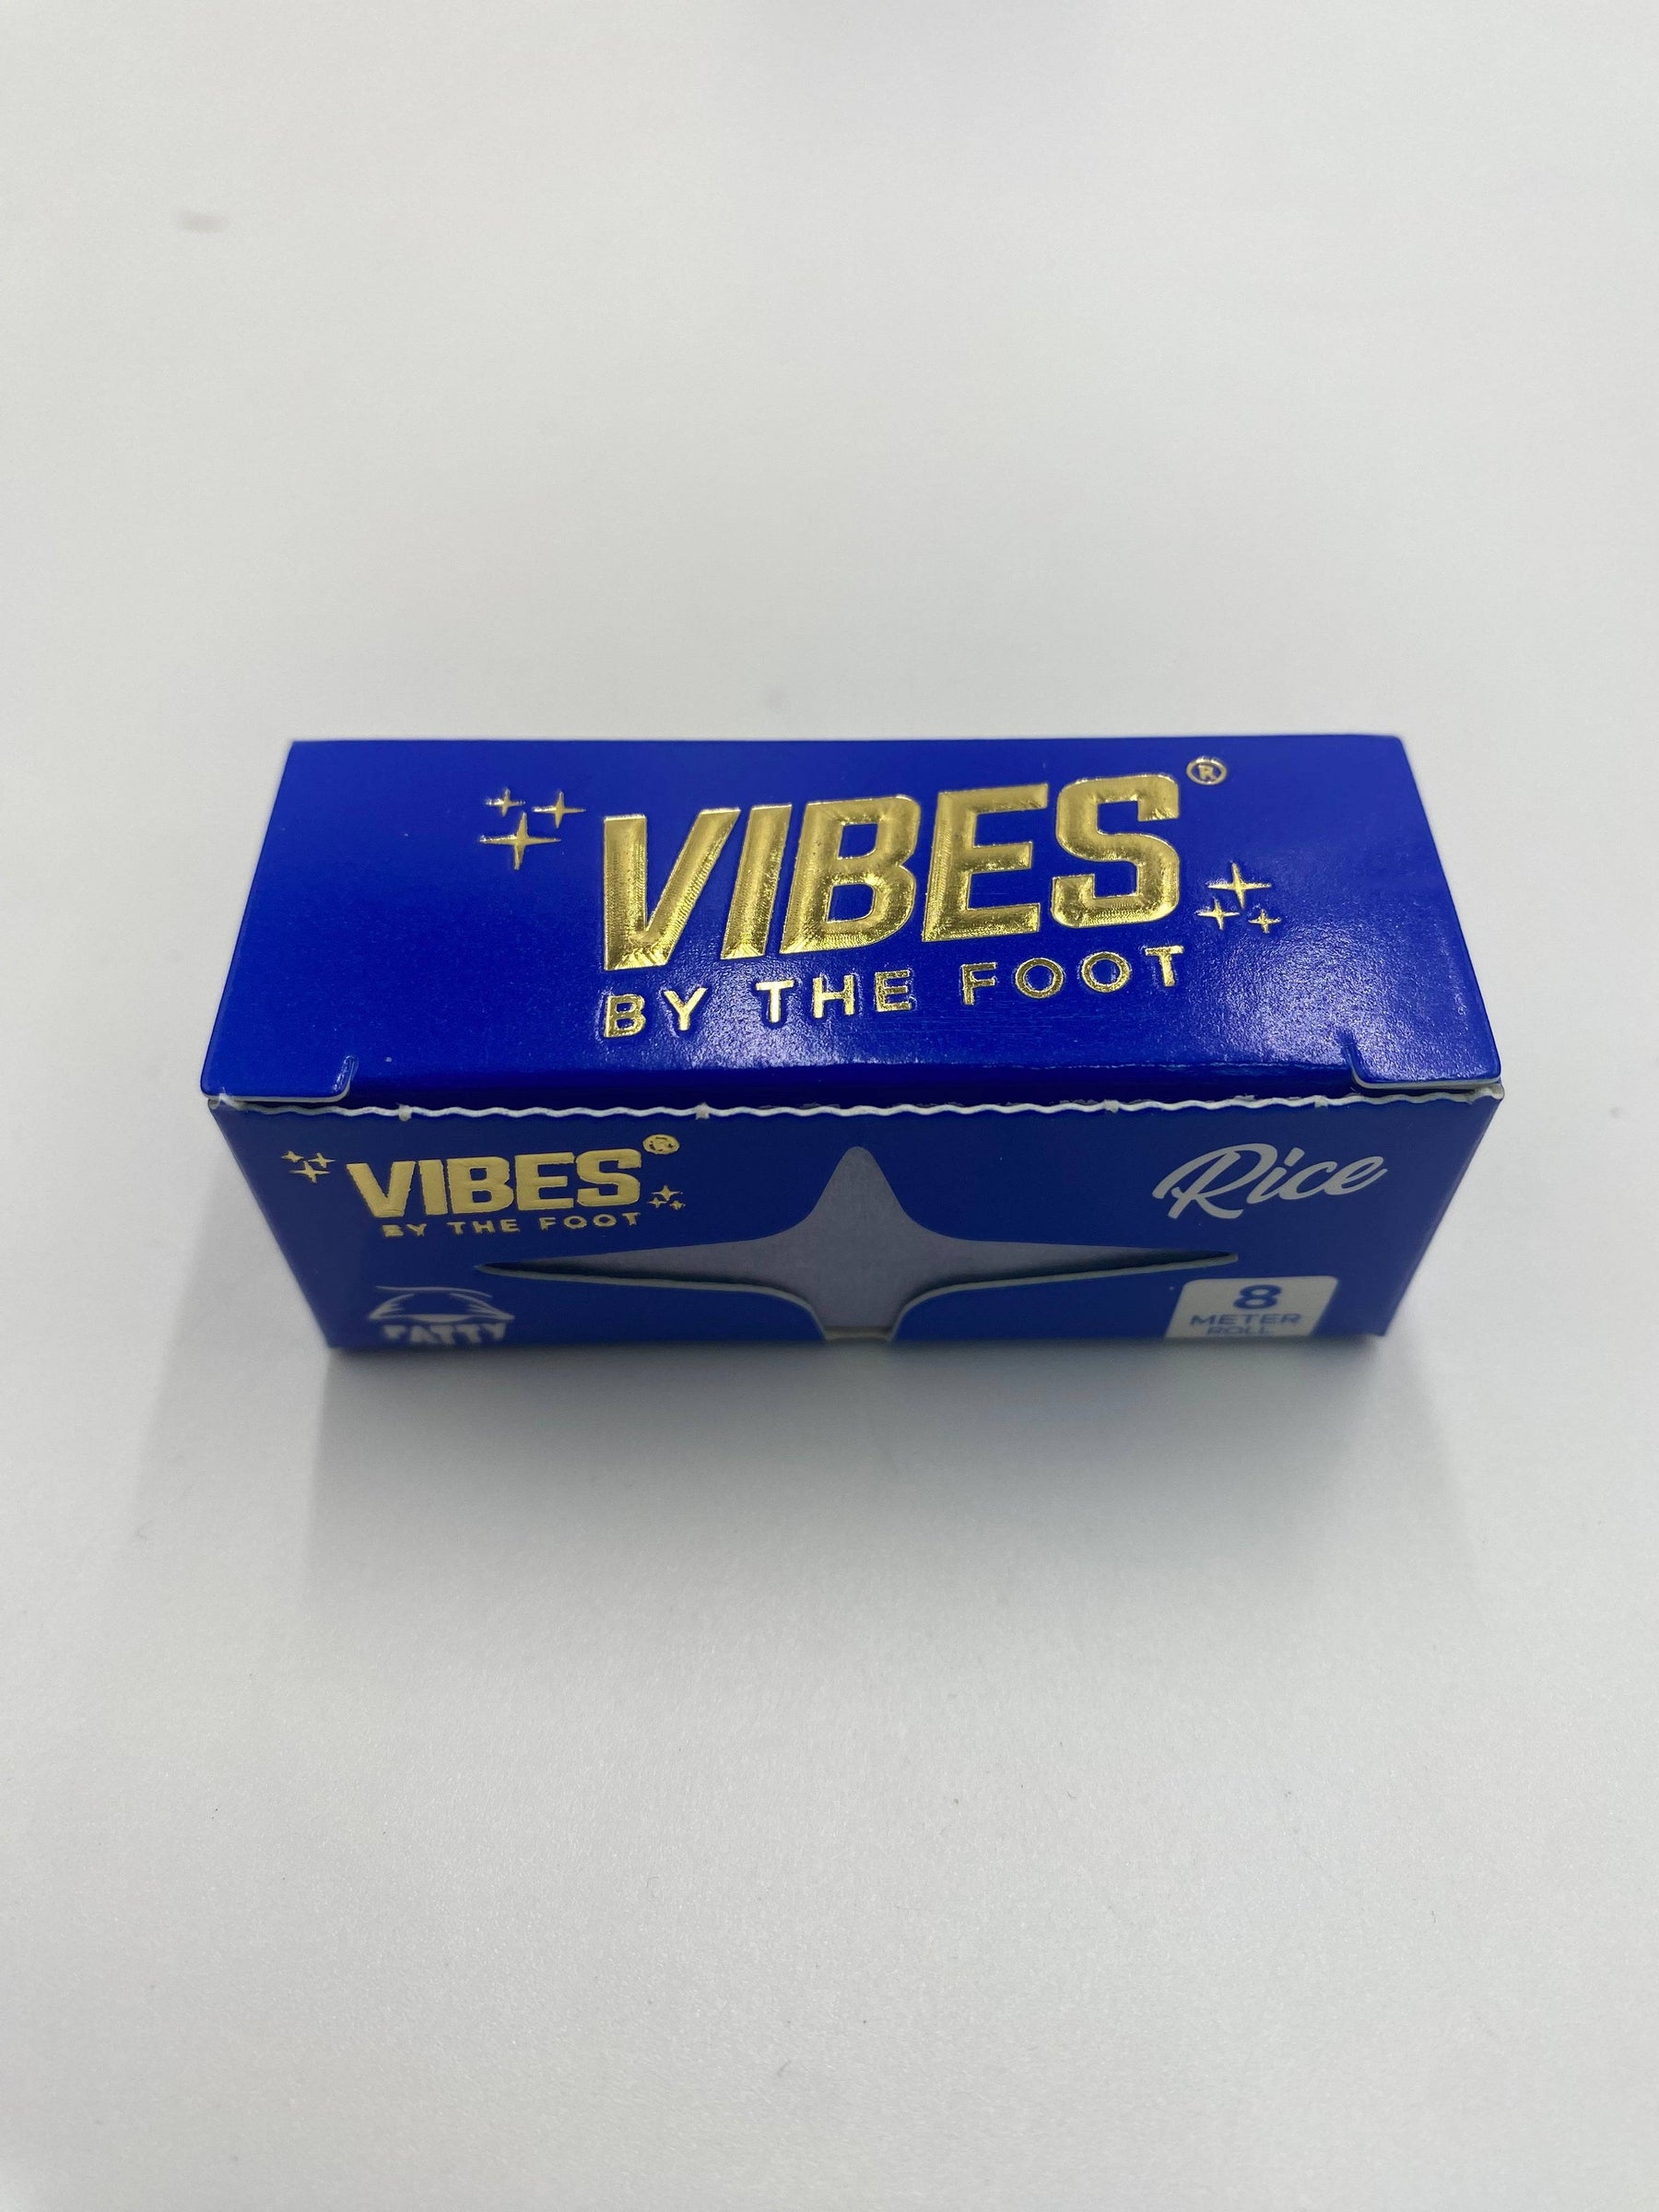 Vibes Fatty By The Foot Rice Rolling Papers 12ct Box 8 Meters Each